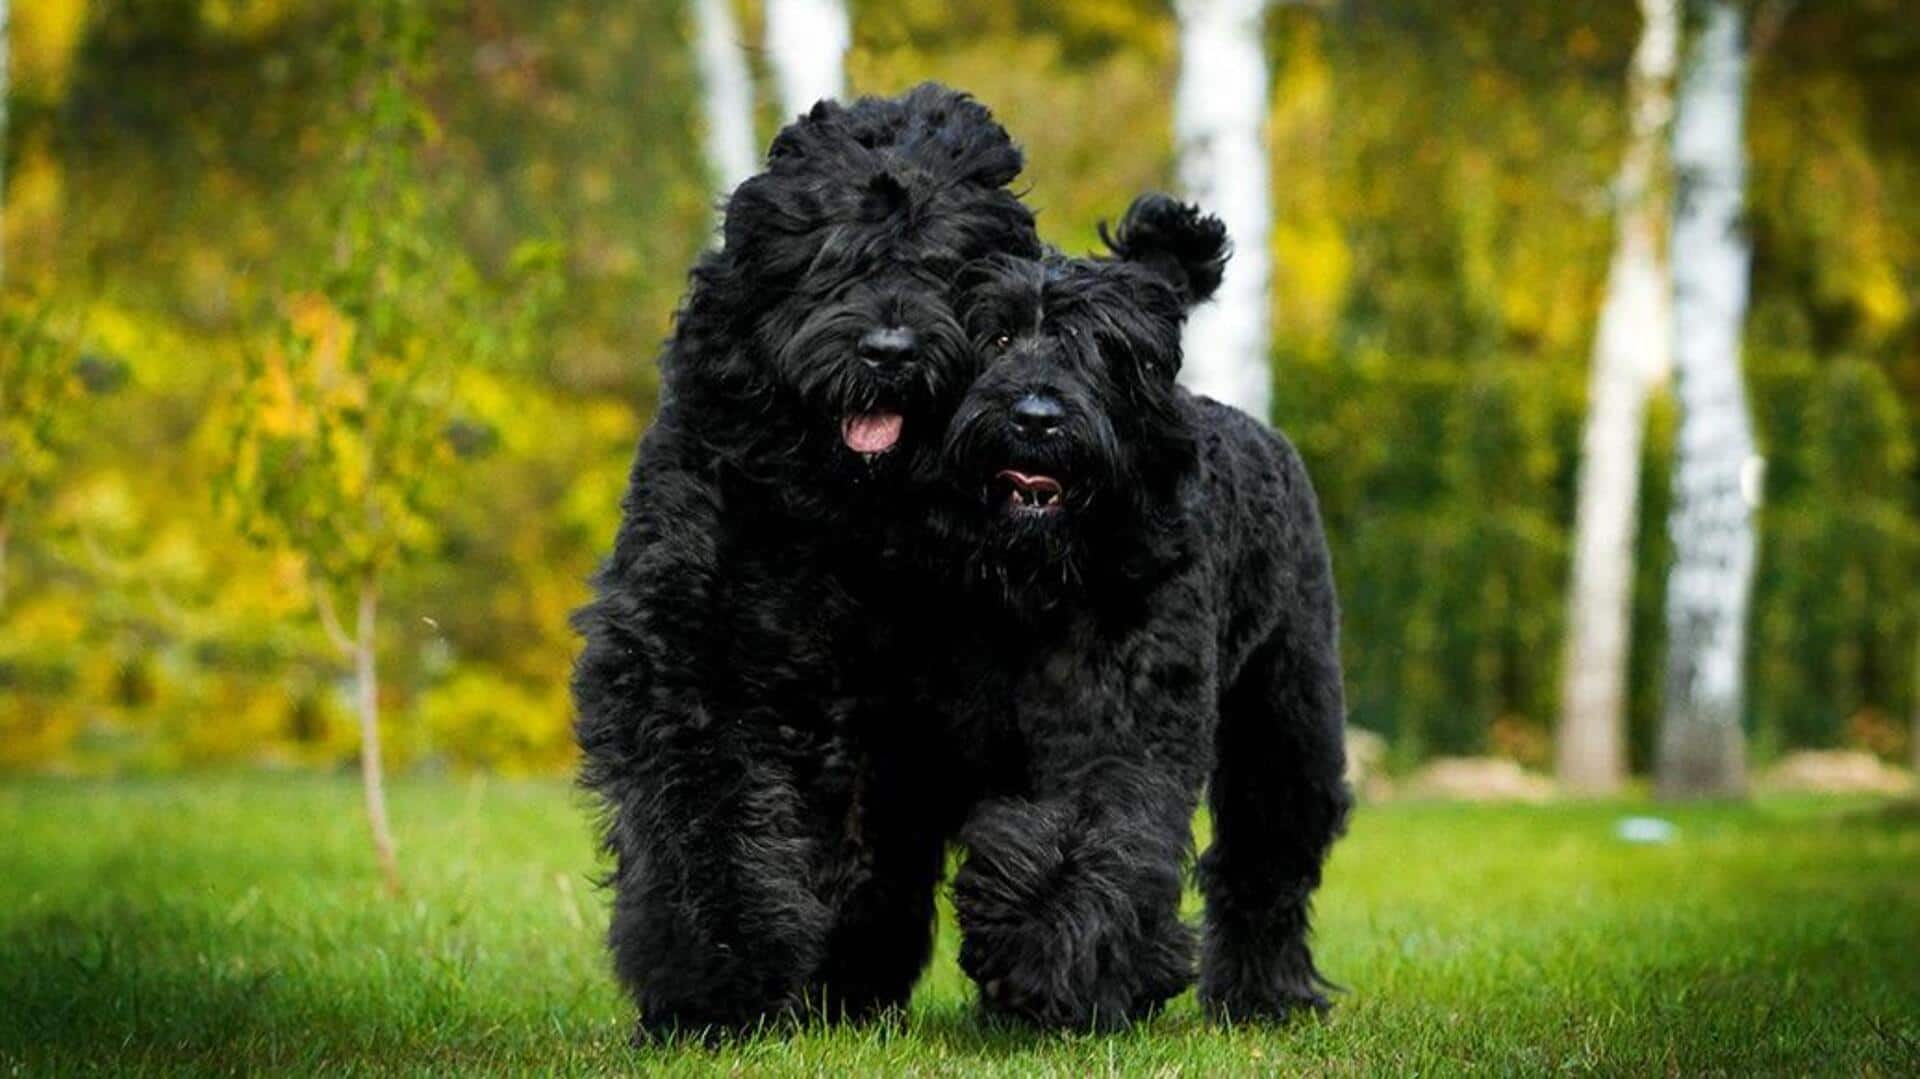 Care tips for your Black Russian Terrier dog